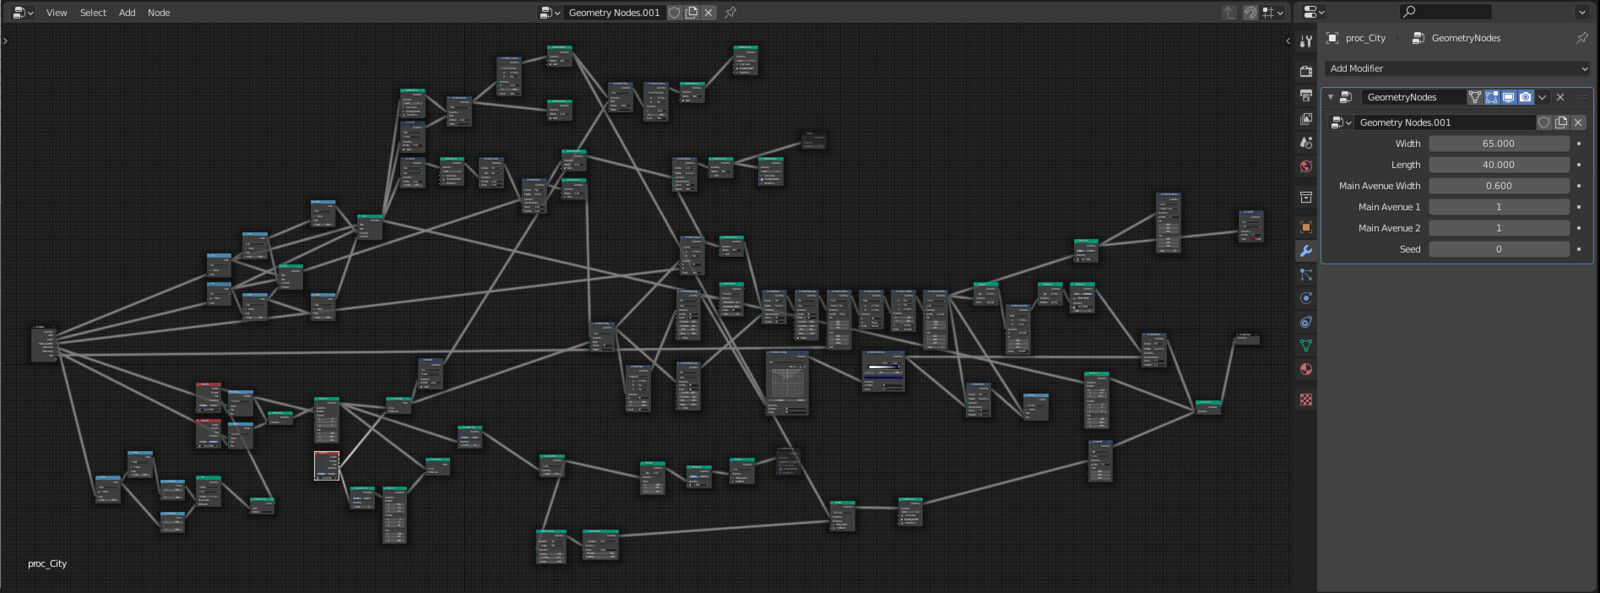 Snapshot of the network and controls using Blender's geometry nodes.